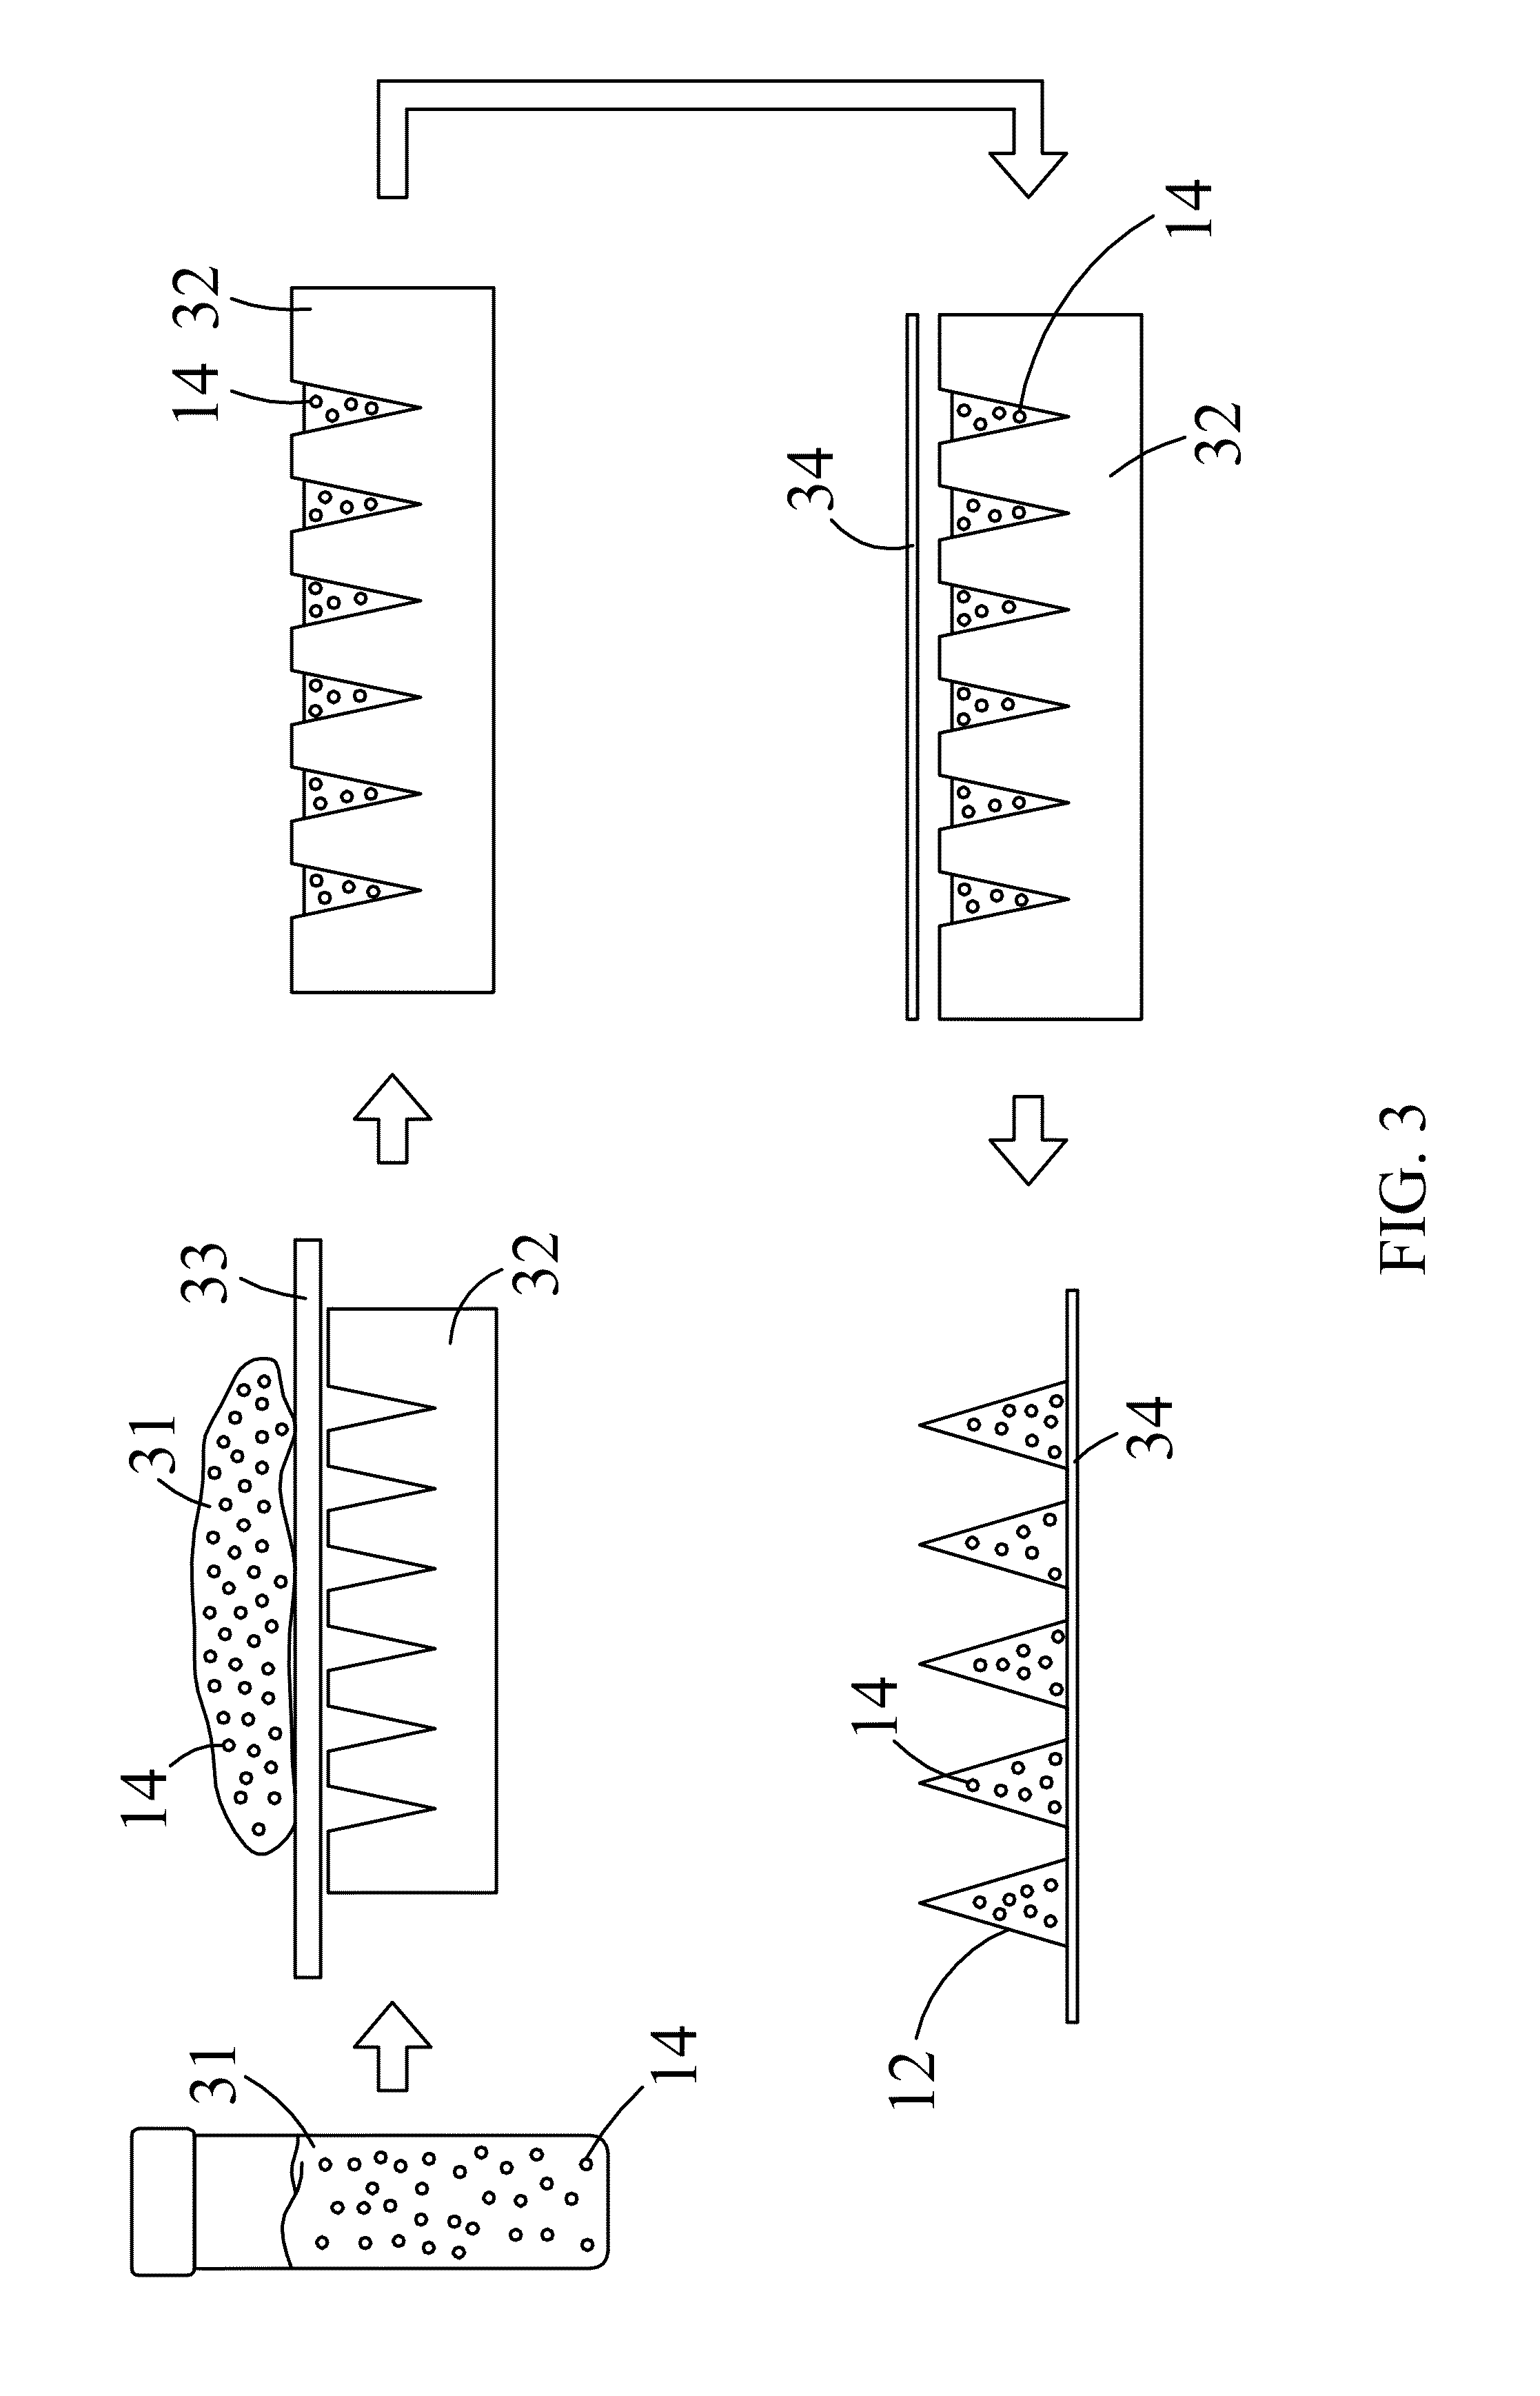 Transdermal drug delivery patch and method of controlling drug release of the same by near-IR